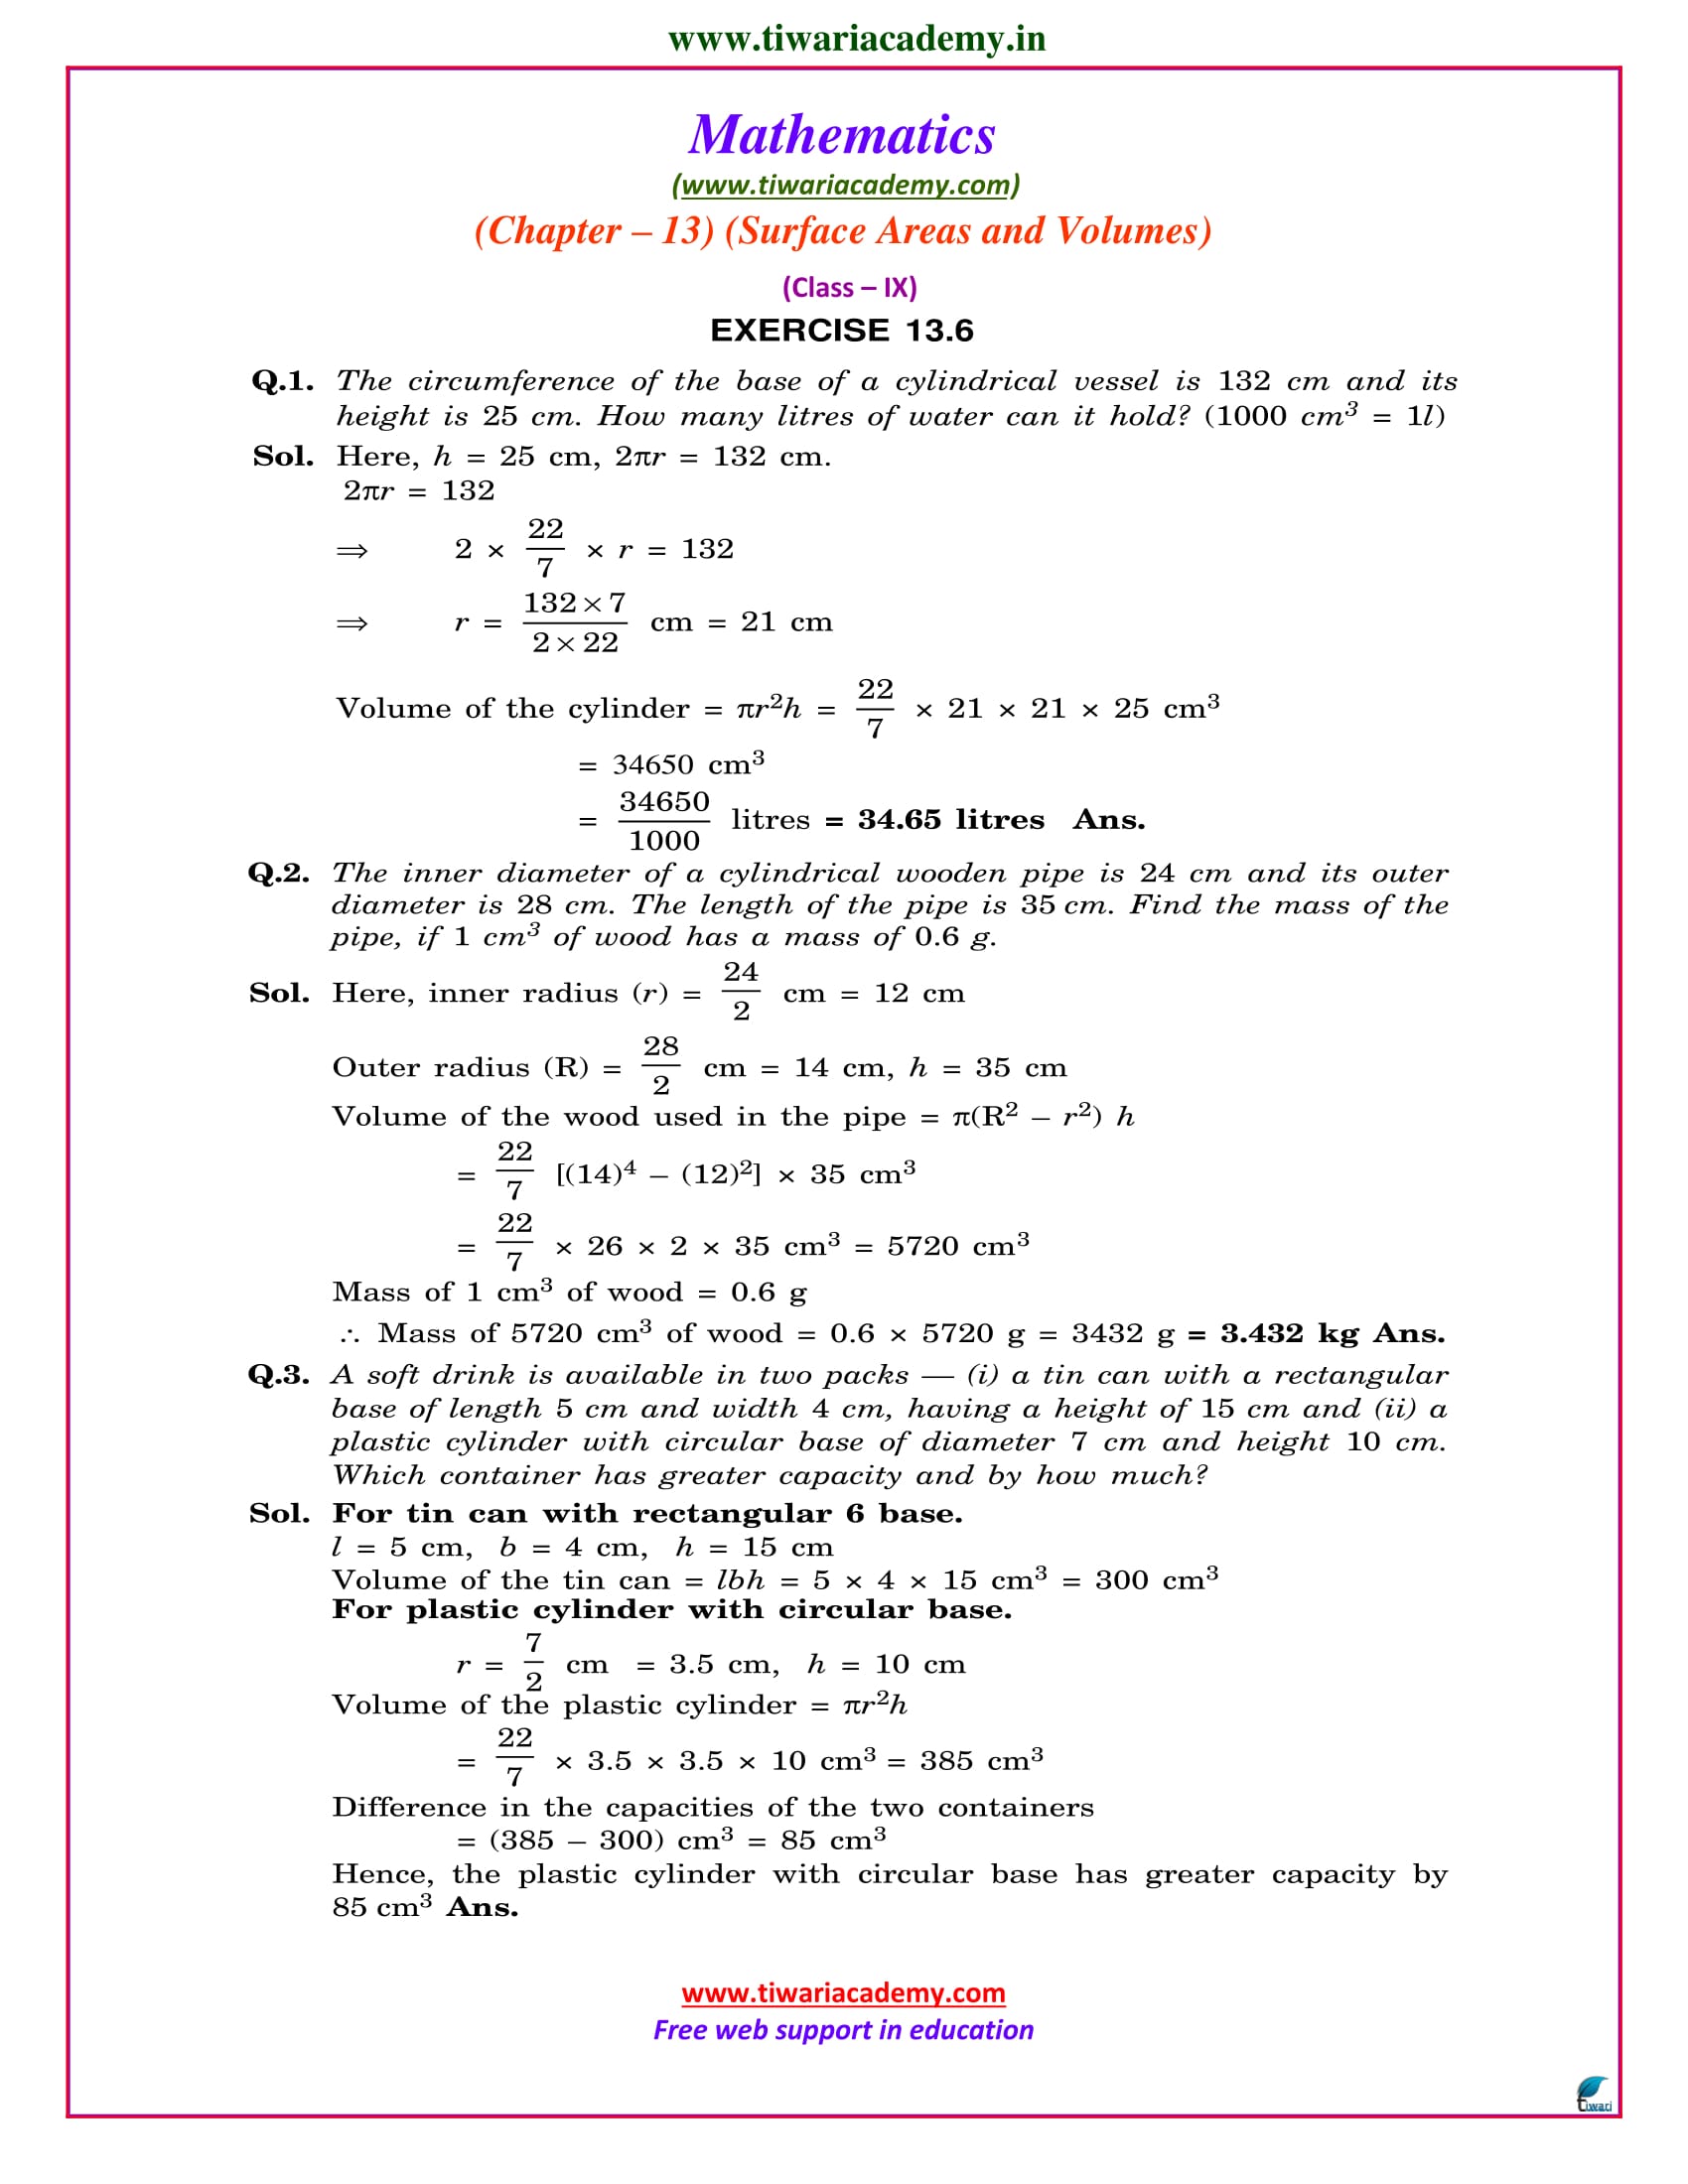 NCERT Solutions for Class 9 Maths Chapter 13 Exercise 13.6